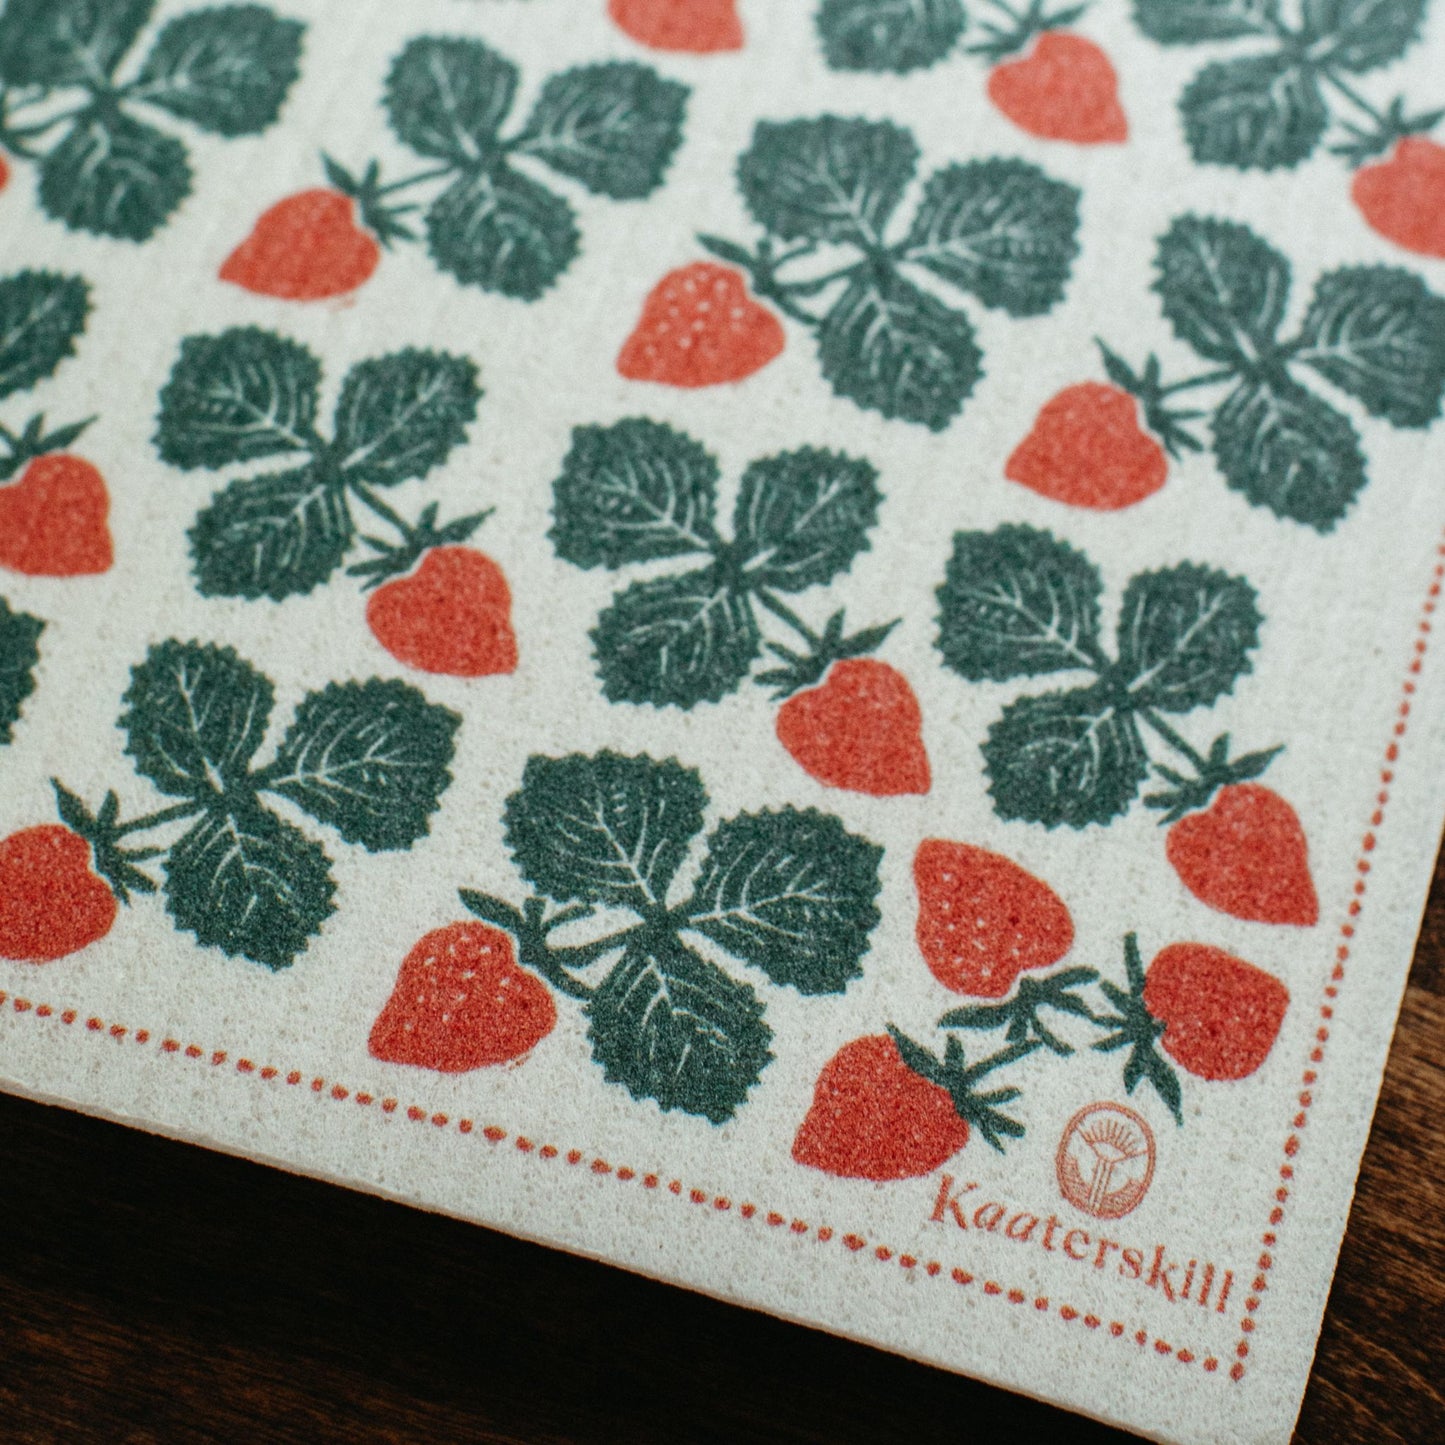 Swedish dishcloth with strawberrys and kaaterskill logo on a wooden table